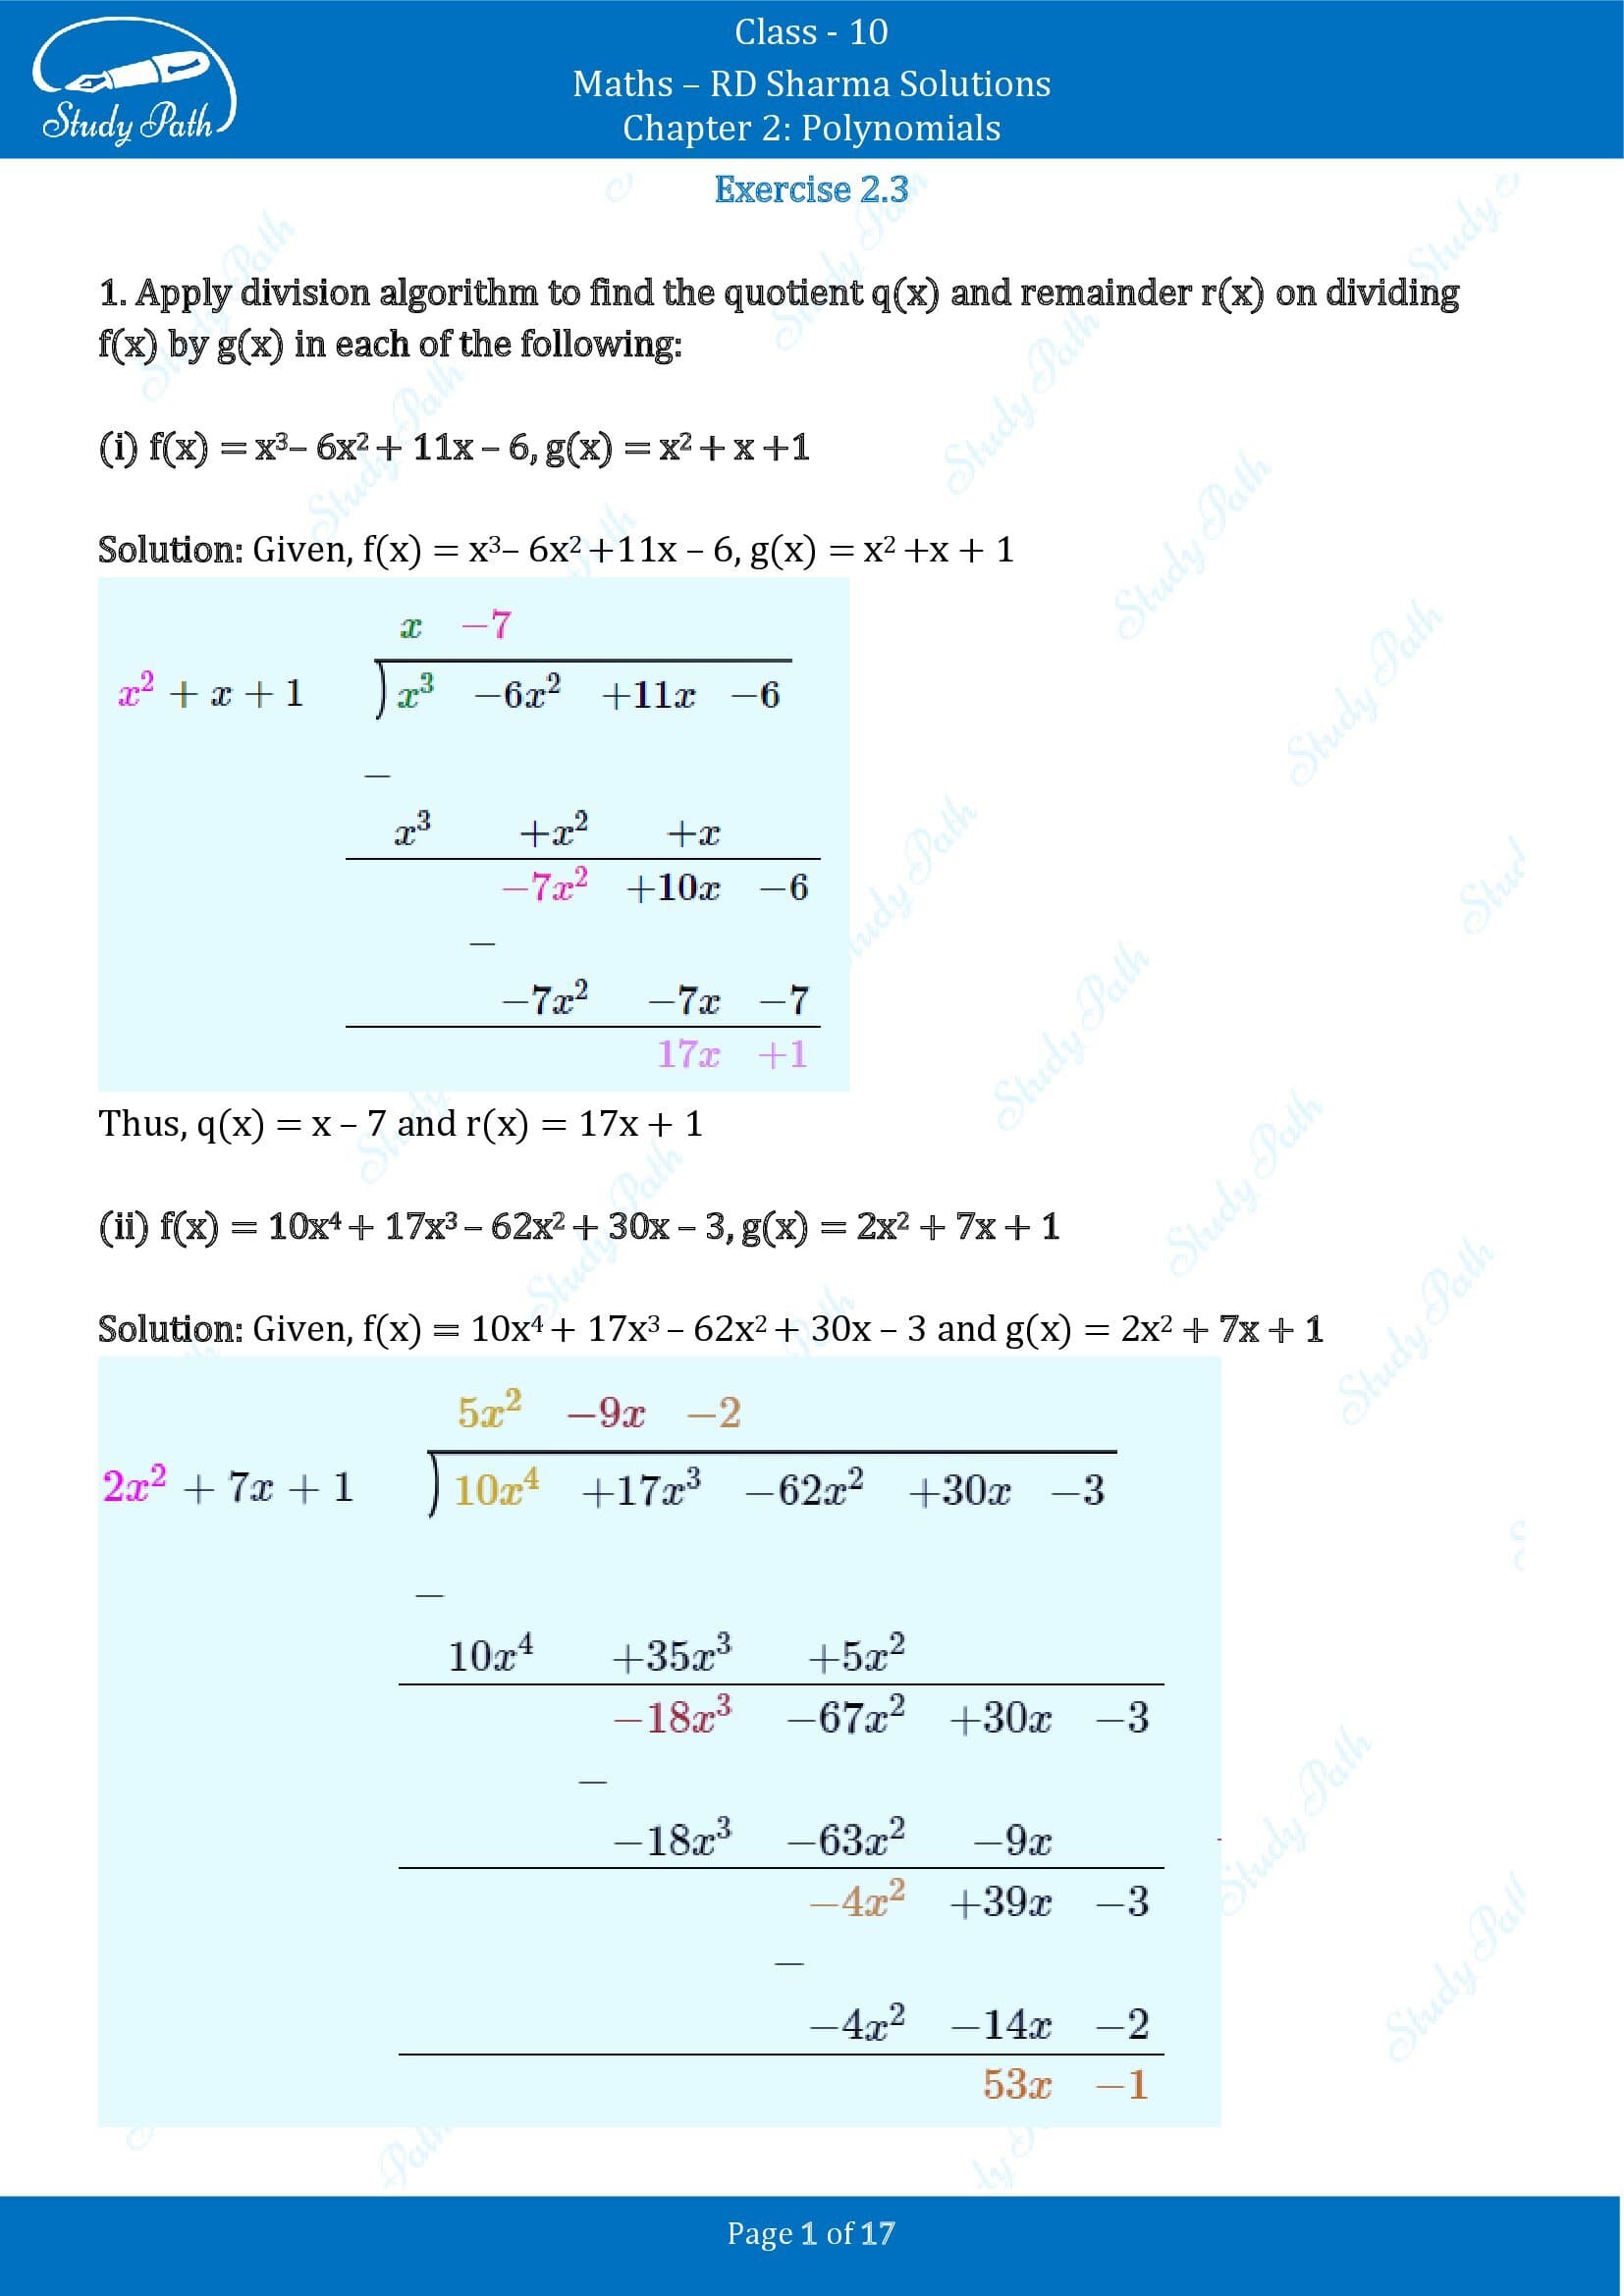 RD Sharma Solutions Class 10 Chapter 2 Polynomials Exercise 2.3 00001